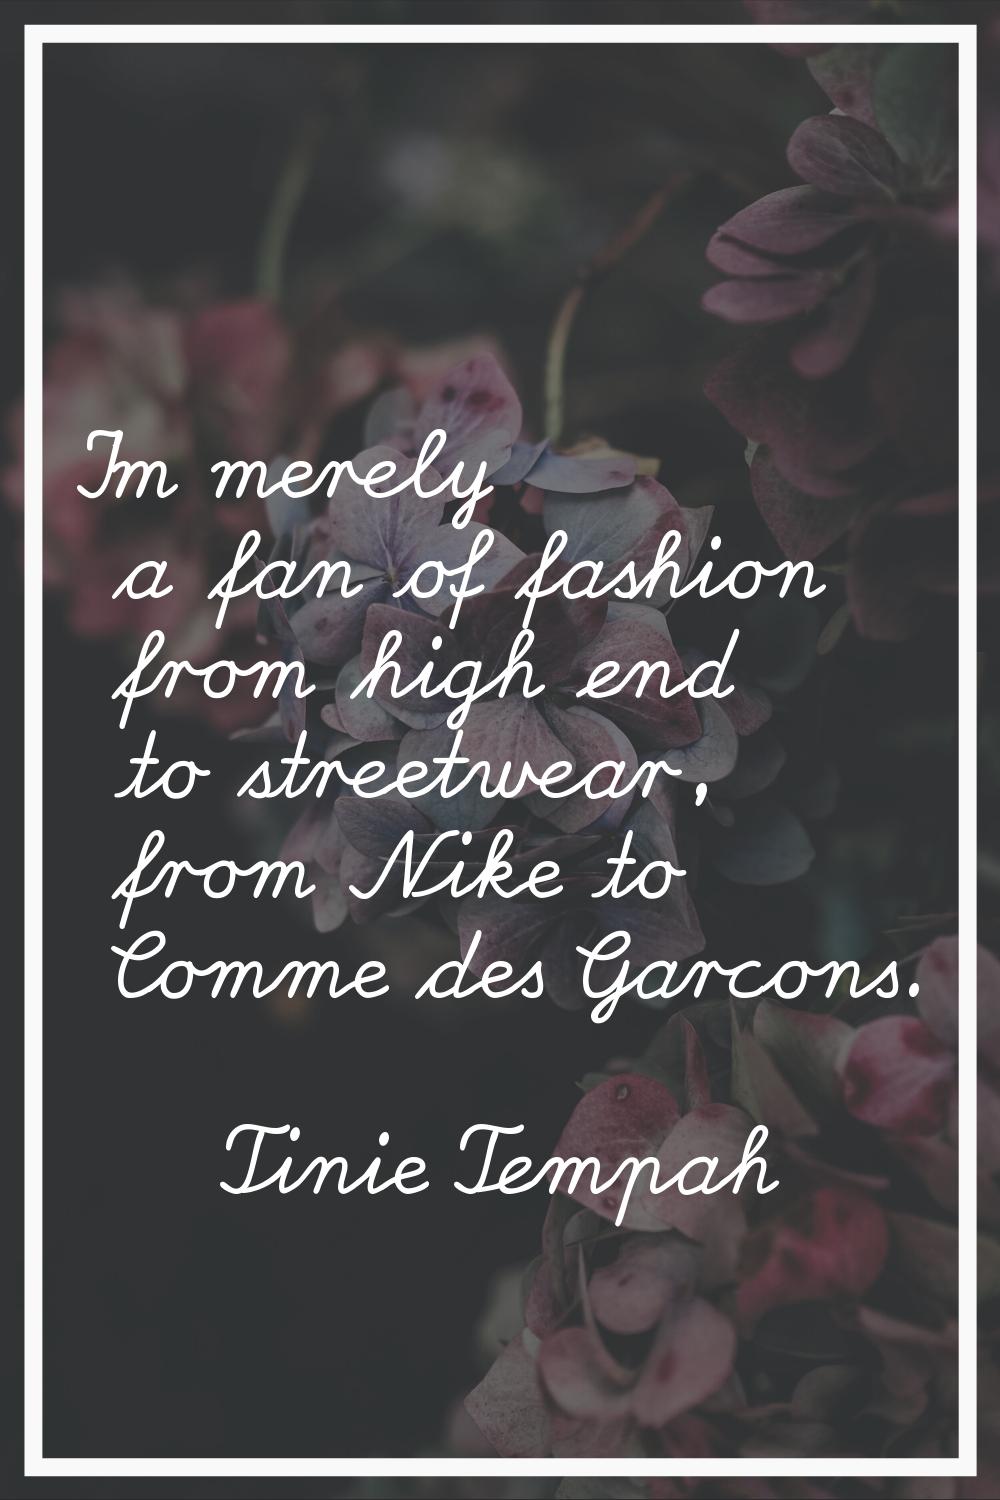 I'm merely a fan of fashion from high end to streetwear, from Nike to Comme des Garcons.